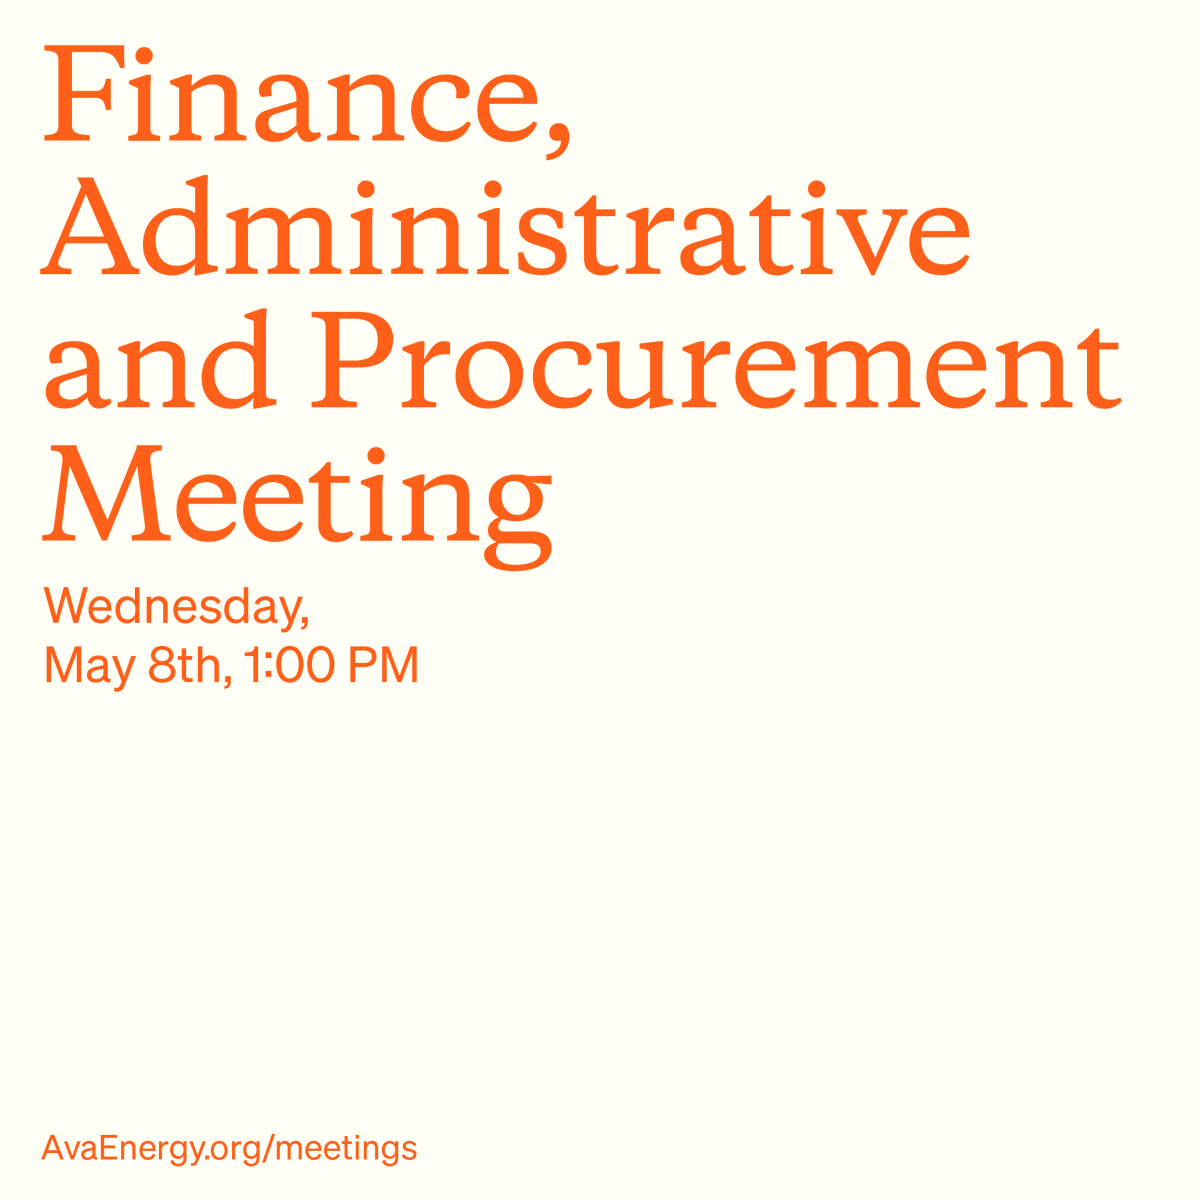 The Finance, Administrative, and Procurement Subcommittee meets tomorrow, Wednesday, May 8 at 1pm. Meetings are open to the public and we welcome public comment. This meeting will be held in a hybrid format. Details here: ow.ly/aTz050RsJTu